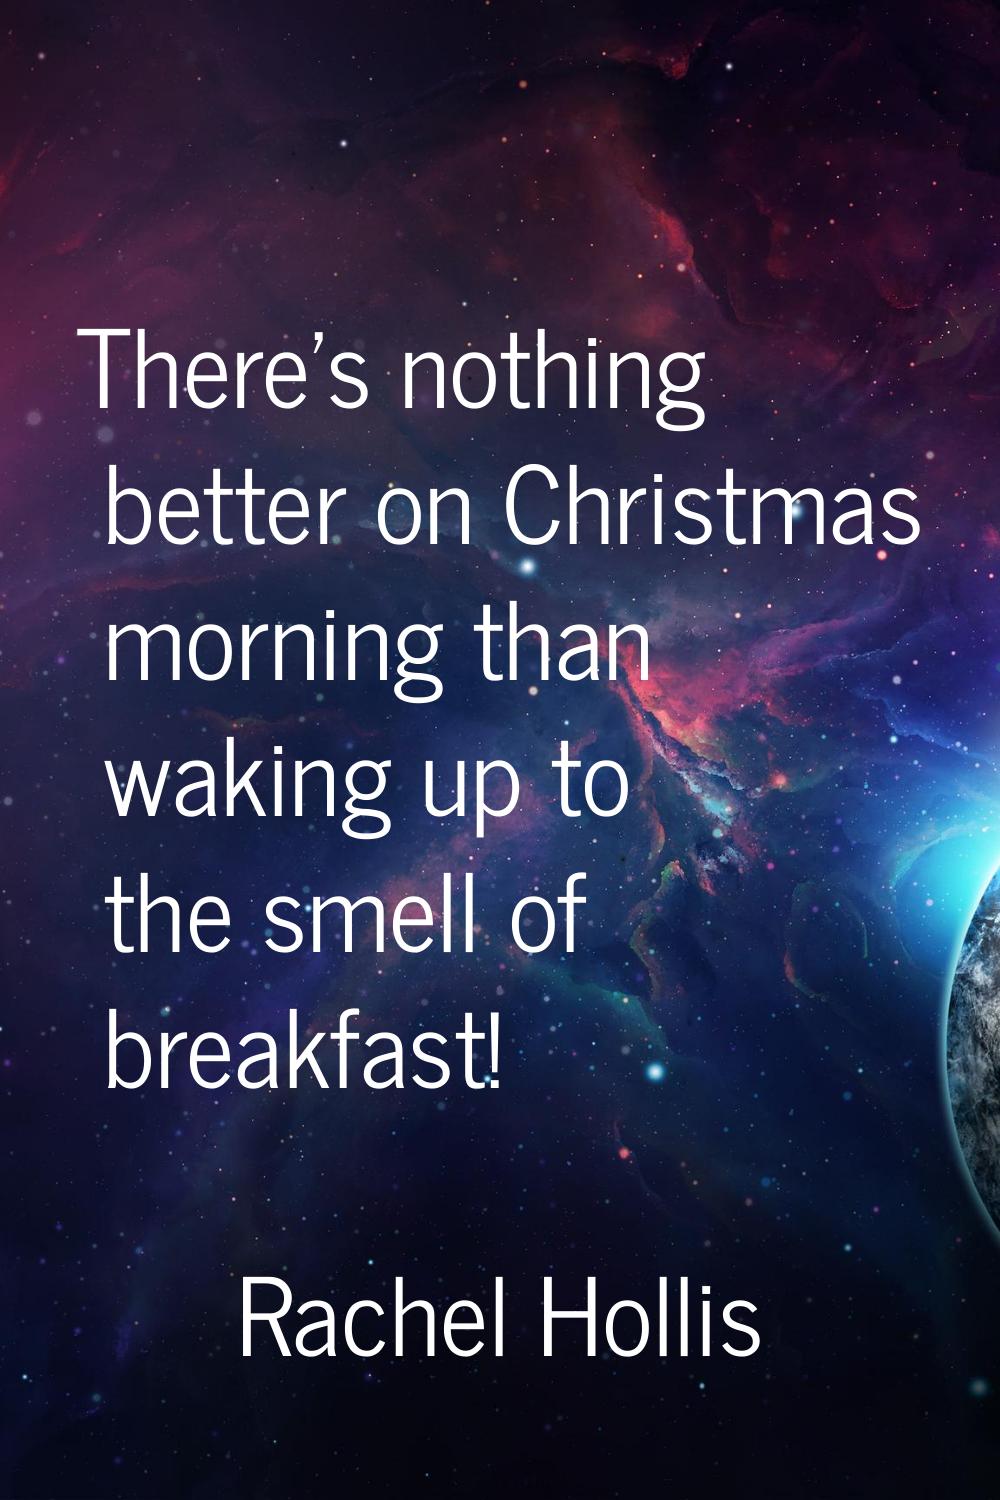 There's nothing better on Christmas morning than waking up to the smell of breakfast!